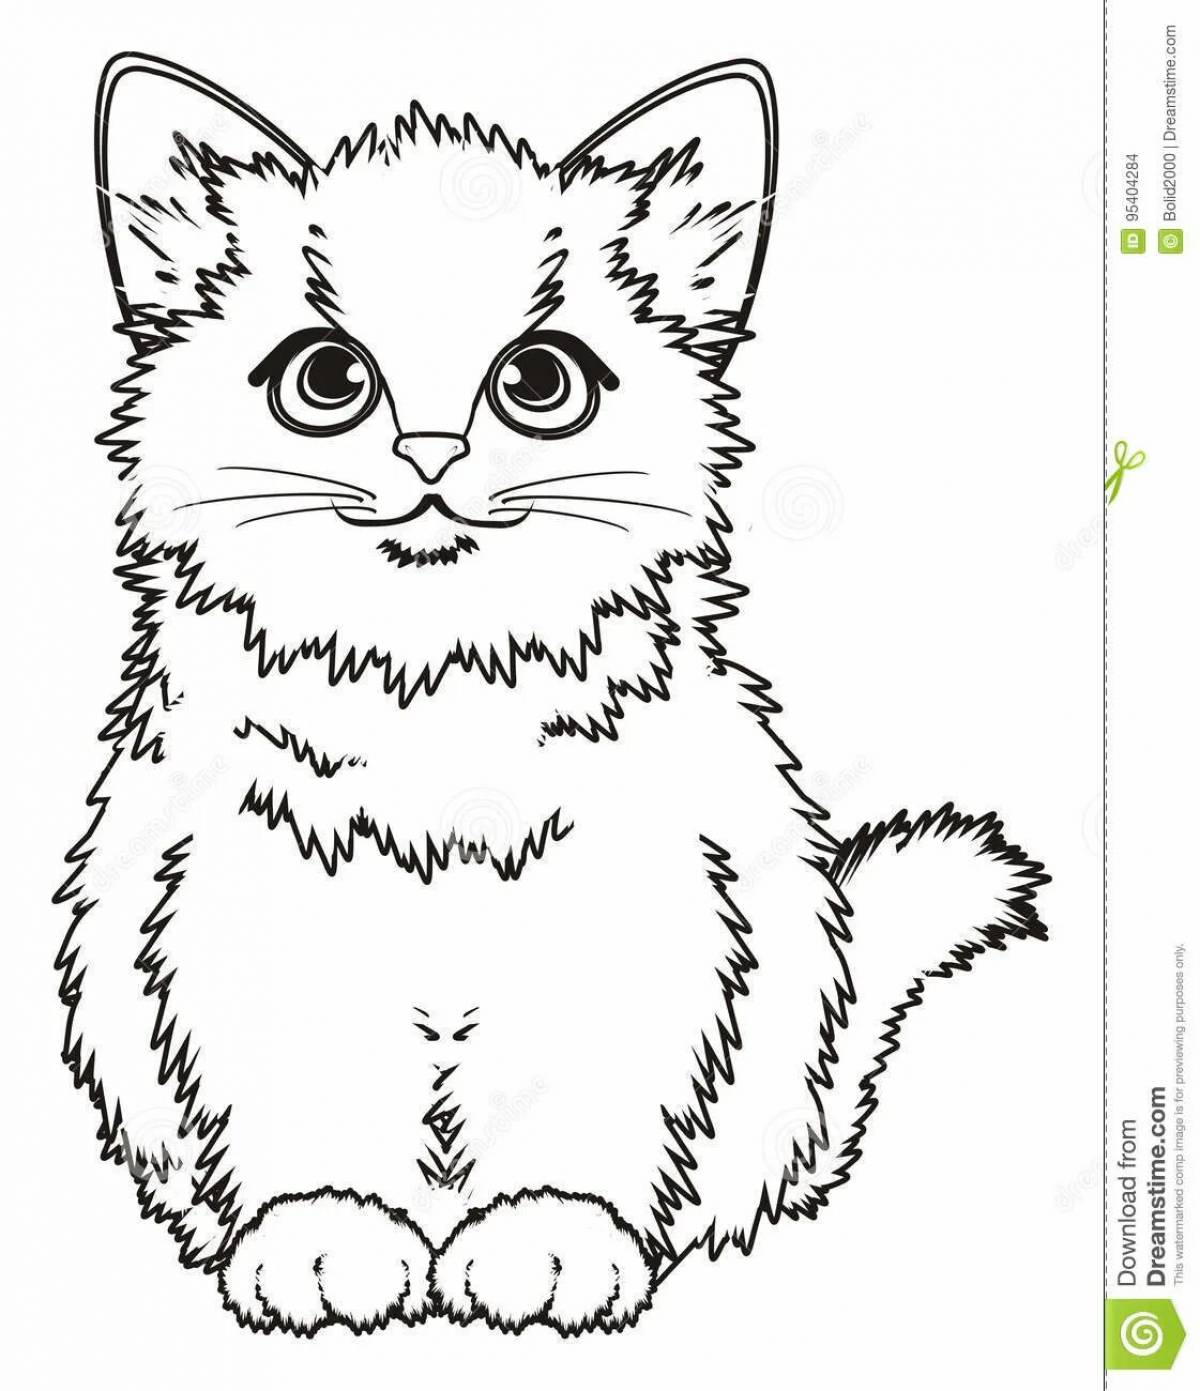 Brave kitten coloring pages for kids